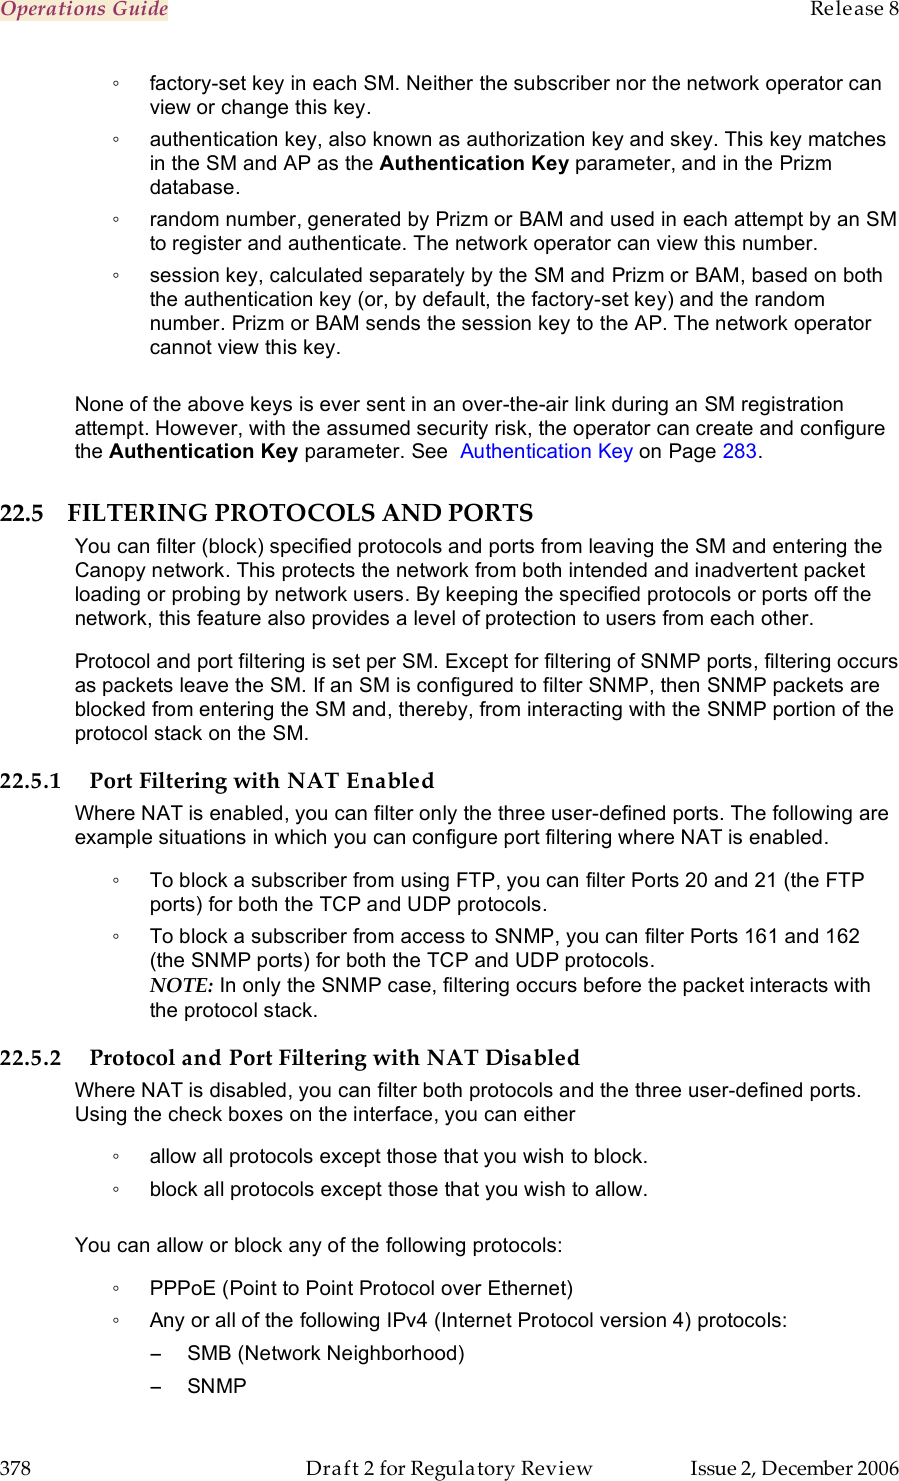 Operations Guide    Release 8   378  Draft 2 for Regulatory Review  Issue 2, December 2006 ◦  factory-set key in each SM. Neither the subscriber nor the network operator can view or change this key. ◦  authentication key, also known as authorization key and skey. This key matches in the SM and AP as the Authentication Key parameter, and in the Prizm database. ◦  random number, generated by Prizm or BAM and used in each attempt by an SM to register and authenticate. The network operator can view this number. ◦  session key, calculated separately by the SM and Prizm or BAM, based on both the authentication key (or, by default, the factory-set key) and the random number. Prizm or BAM sends the session key to the AP. The network operator cannot view this key.  None of the above keys is ever sent in an over-the-air link during an SM registration attempt. However, with the assumed security risk, the operator can create and configure the Authentication Key parameter. See  Authentication Key on Page 283.  22.5 FILTERING PROTOCOLS AND PORTS You can filter (block) specified protocols and ports from leaving the SM and entering the Canopy network. This protects the network from both intended and inadvertent packet loading or probing by network users. By keeping the specified protocols or ports off the network, this feature also provides a level of protection to users from each other. Protocol and port filtering is set per SM. Except for filtering of SNMP ports, filtering occurs as packets leave the SM. If an SM is configured to filter SNMP, then SNMP packets are blocked from entering the SM and, thereby, from interacting with the SNMP portion of the protocol stack on the SM. 22.5.1 Port Filtering with NAT Enabled Where NAT is enabled, you can filter only the three user-defined ports. The following are example situations in which you can configure port filtering where NAT is enabled. ◦  To block a subscriber from using FTP, you can filter Ports 20 and 21 (the FTP ports) for both the TCP and UDP protocols.  ◦  To block a subscriber from access to SNMP, you can filter Ports 161 and 162 (the SNMP ports) for both the TCP and UDP protocols.  NOTE: In only the SNMP case, filtering occurs before the packet interacts with the protocol stack. 22.5.2 Protocol and Port Filtering with NAT Disabled Where NAT is disabled, you can filter both protocols and the three user-defined ports. Using the check boxes on the interface, you can either  ◦  allow all protocols except those that you wish to block. ◦  block all protocols except those that you wish to allow.  You can allow or block any of the following protocols: ◦  PPPoE (Point to Point Protocol over Ethernet) ◦  Any or all of the following IPv4 (Internet Protocol version 4) protocols: −  SMB (Network Neighborhood) −  SNMP 